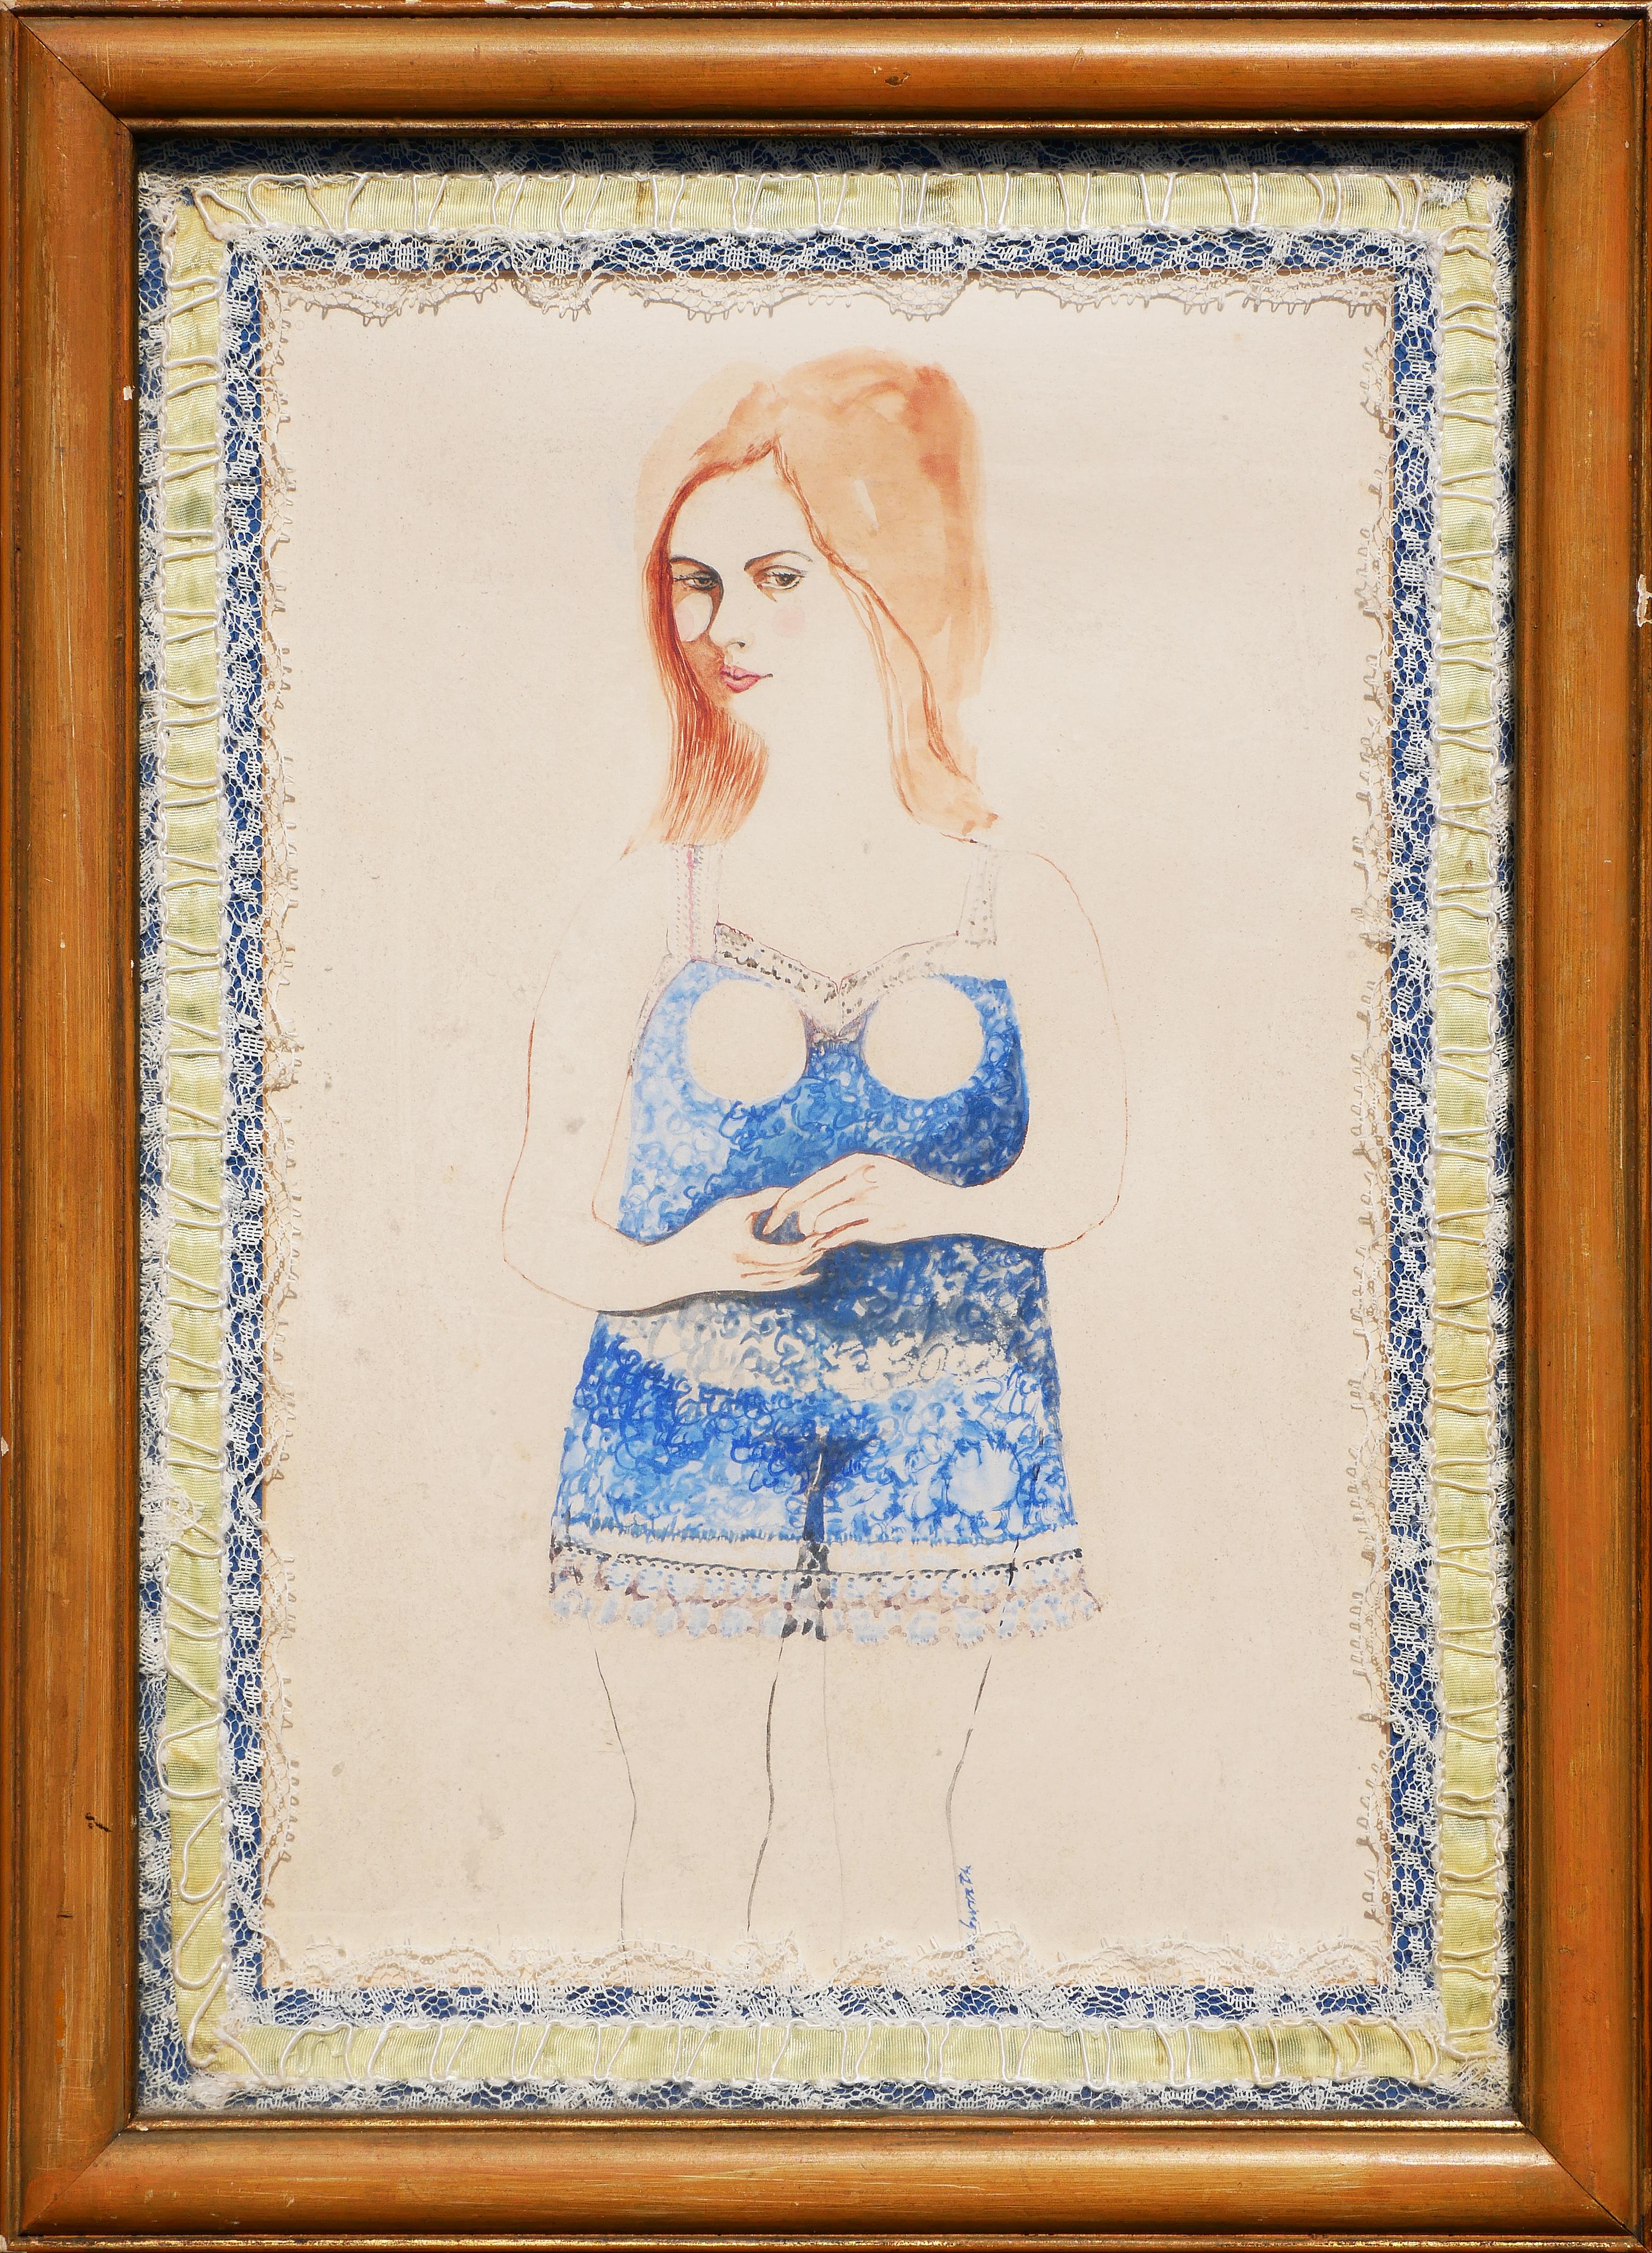 "A Long Time Ago" Modern Figurative Abstract Drawing of a Woman in Blue Lingerie